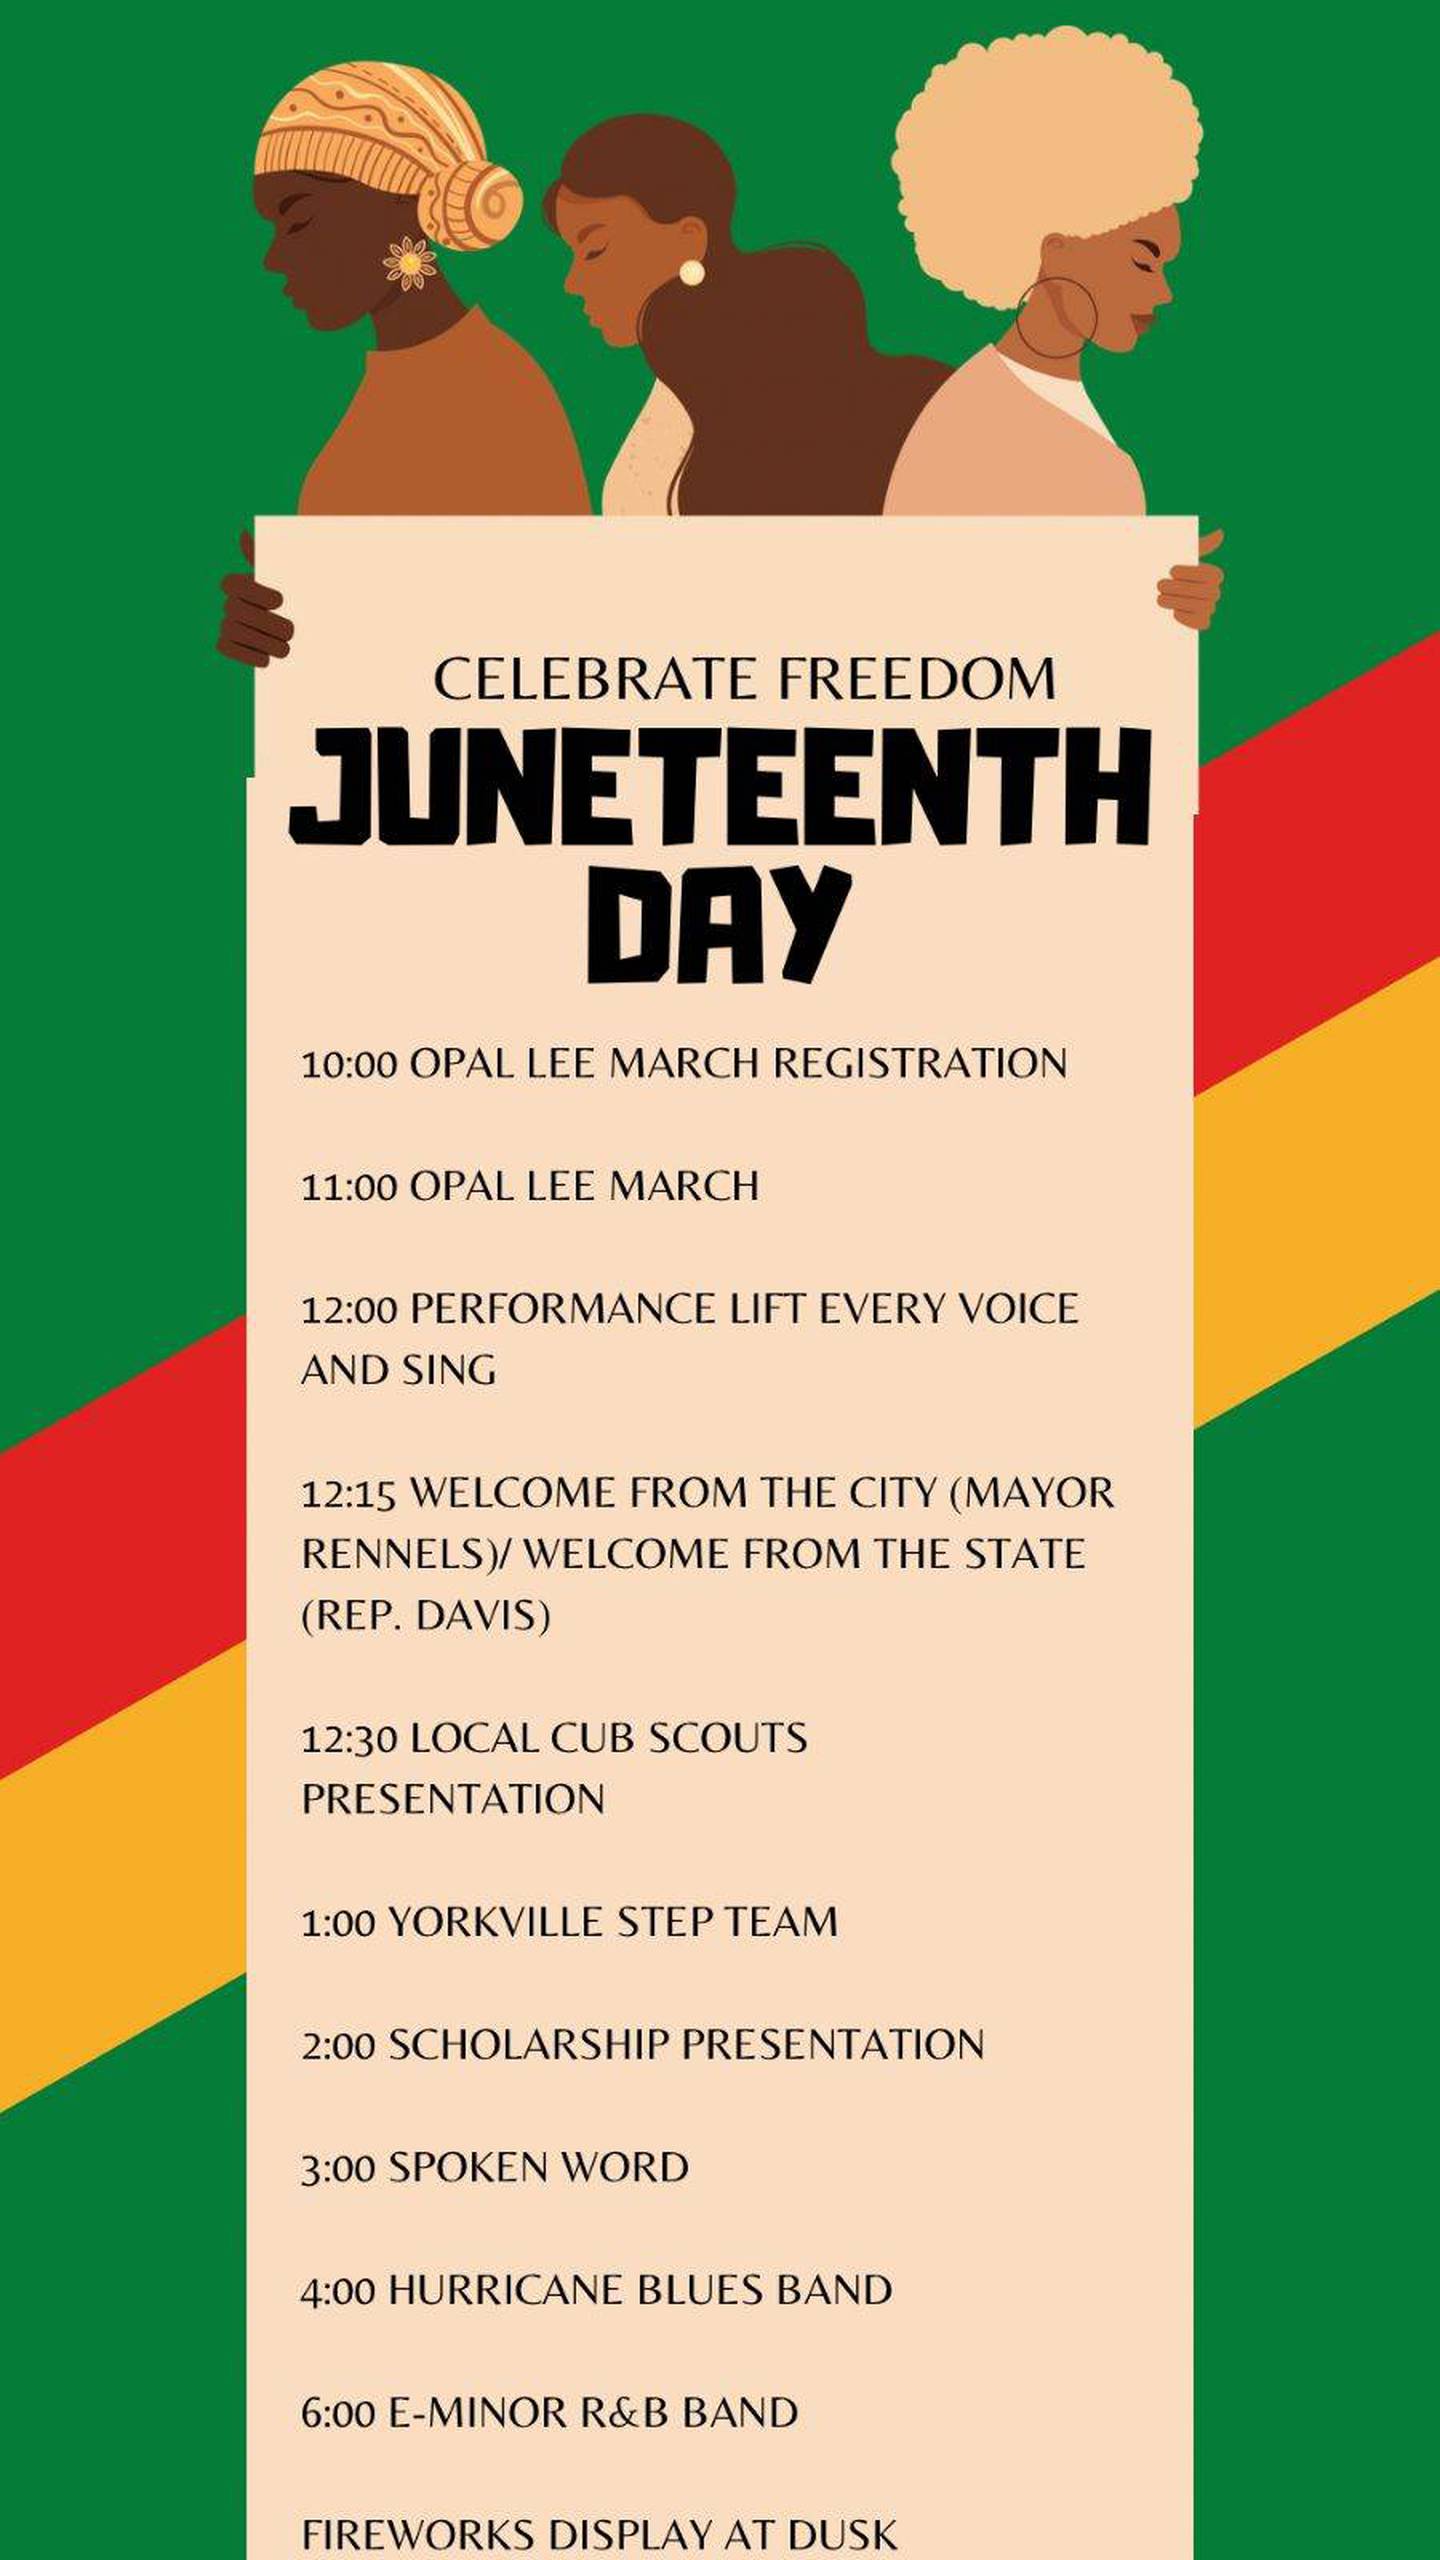 Plano’s fourth annual Juneteenth celebration will take place at noon June 15 at Emily G. Johns School, 430 Mitchell Drive, Plano